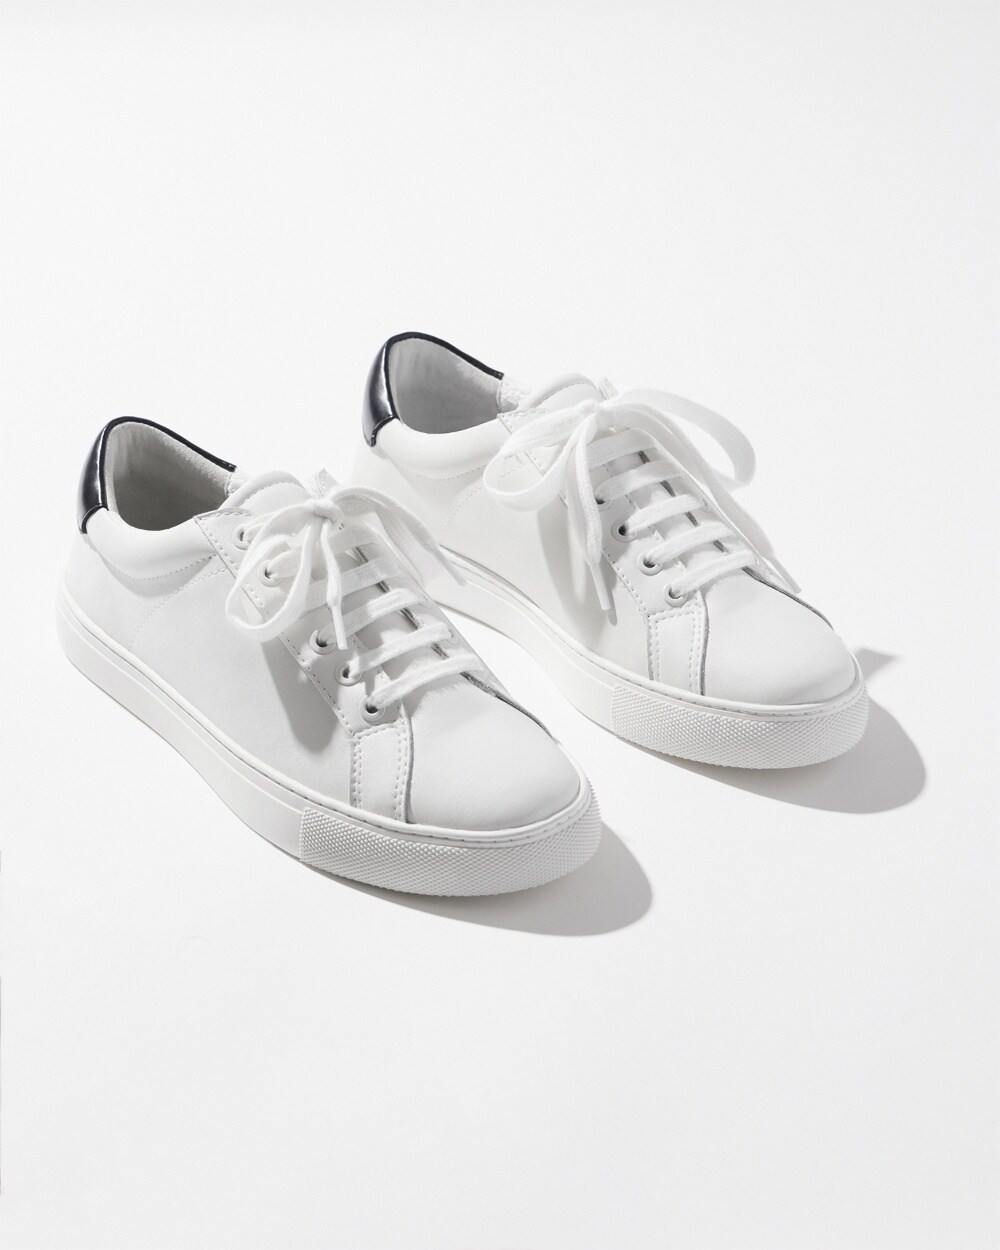 White Leather Sneakers - Chico's